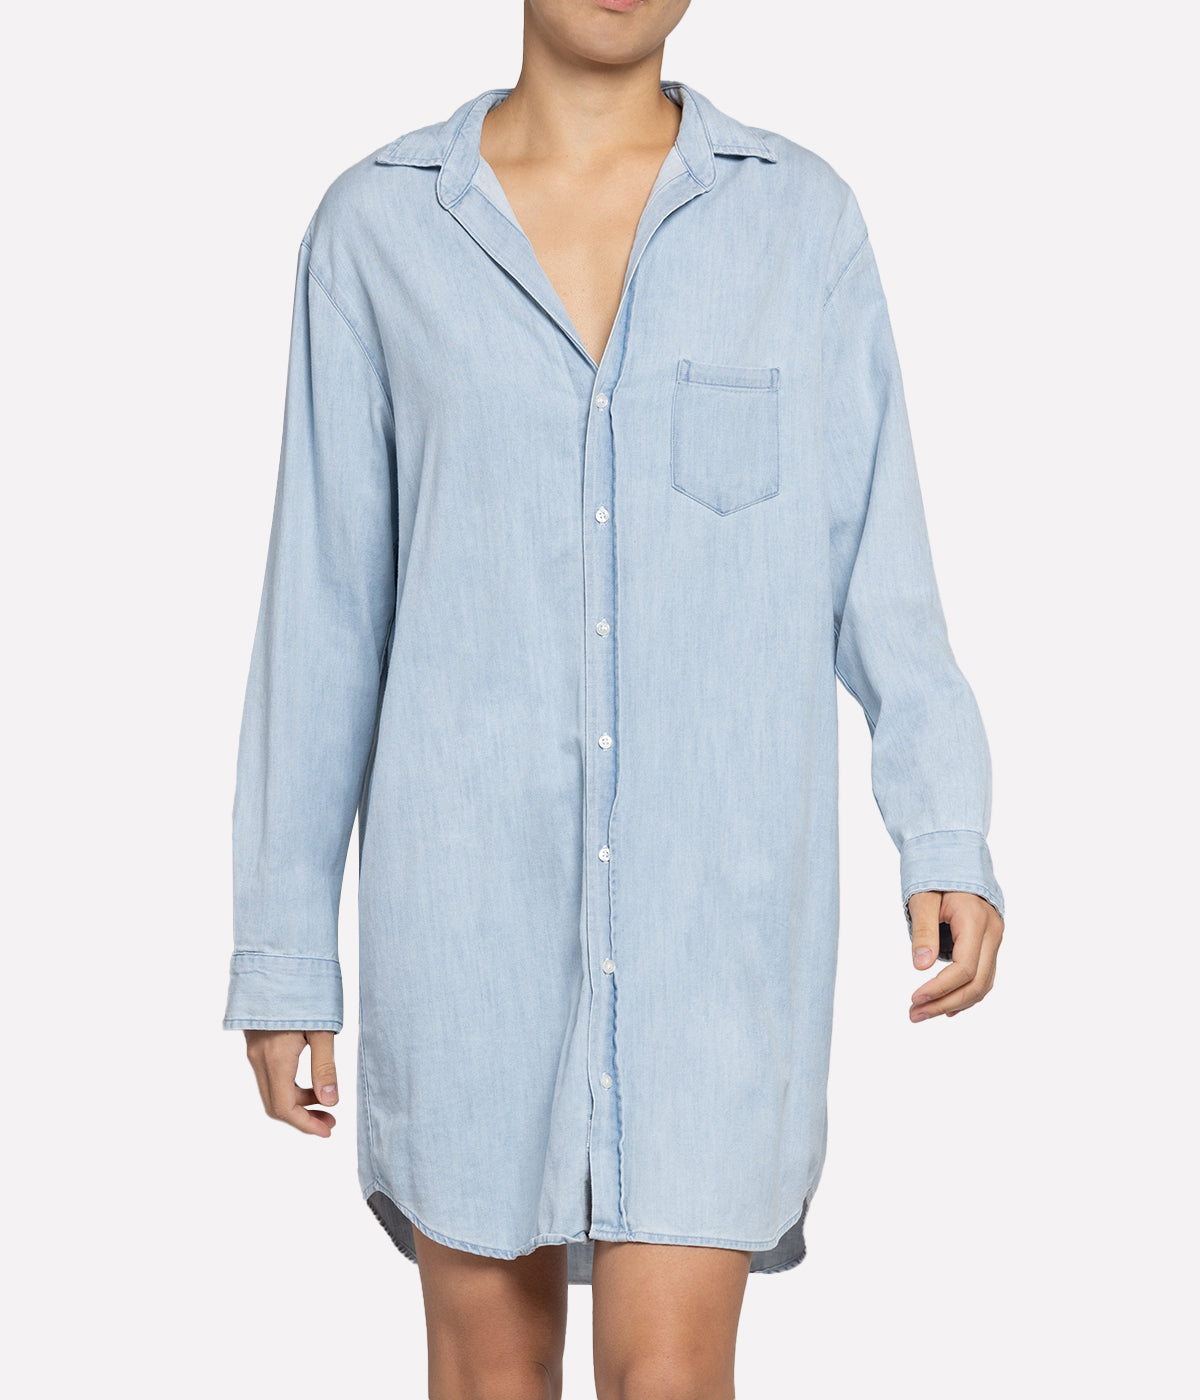 Mary Woven Denim Button Up in Classic Blue Wash